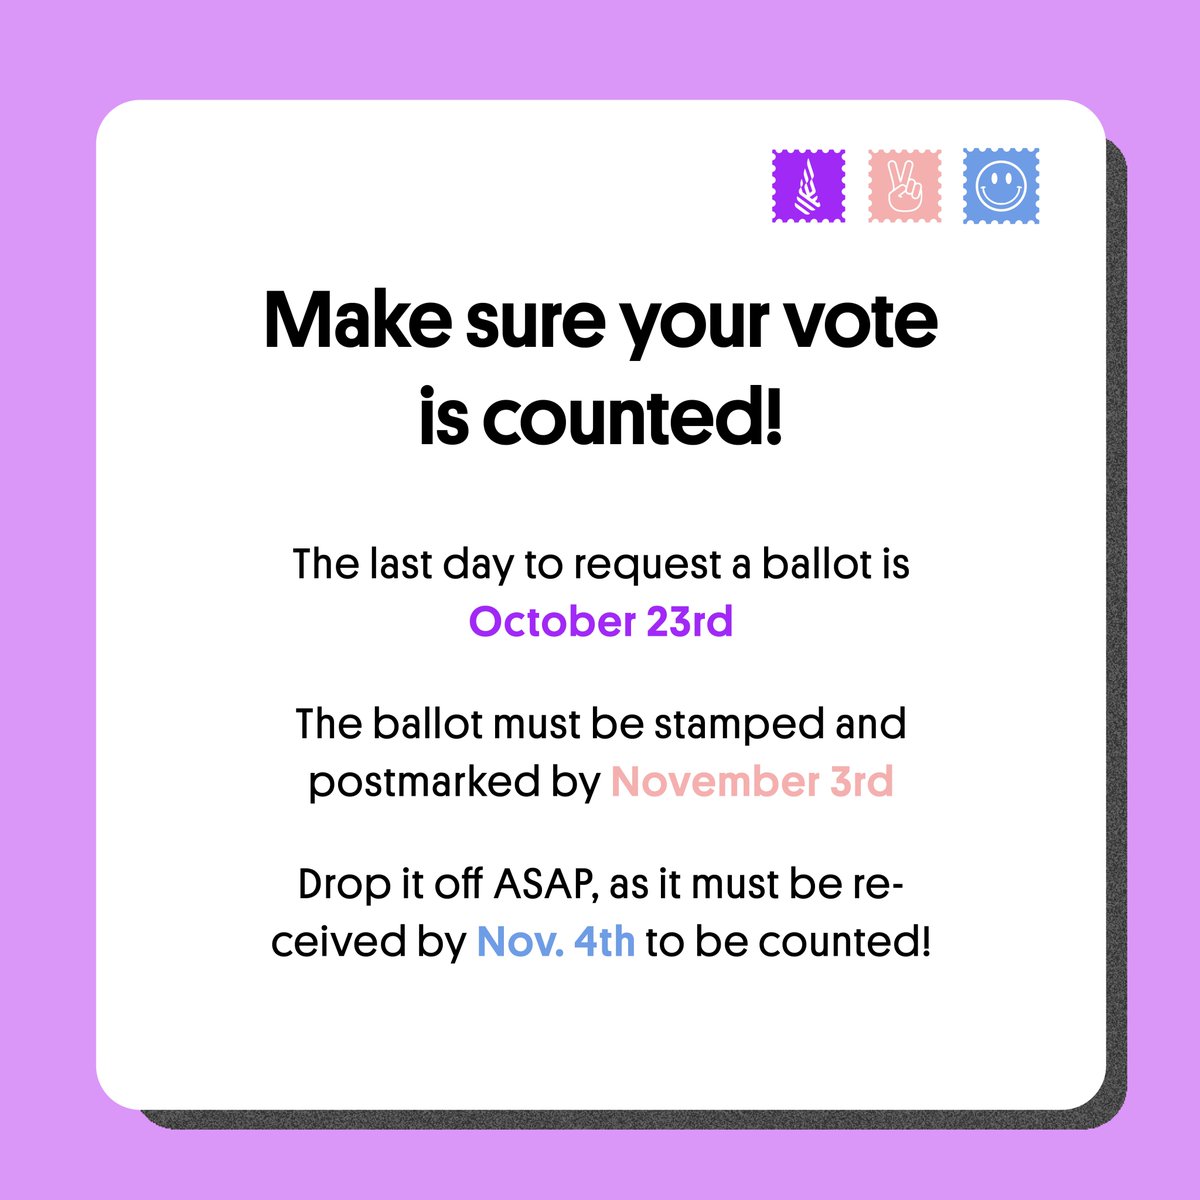 If you don't meet the requirements— plan to vote in person! If you’re eligible, you can request your ballot here:  https://www.sos.texas.gov/elections/voter/reqabbm.shtmlIf you’re planning to use an in-person drop off-site, find your county’s here:  https://www.sos.state.tx.us/elections/voter/votregduties.shtmHappy voting,  #Changemakers! 